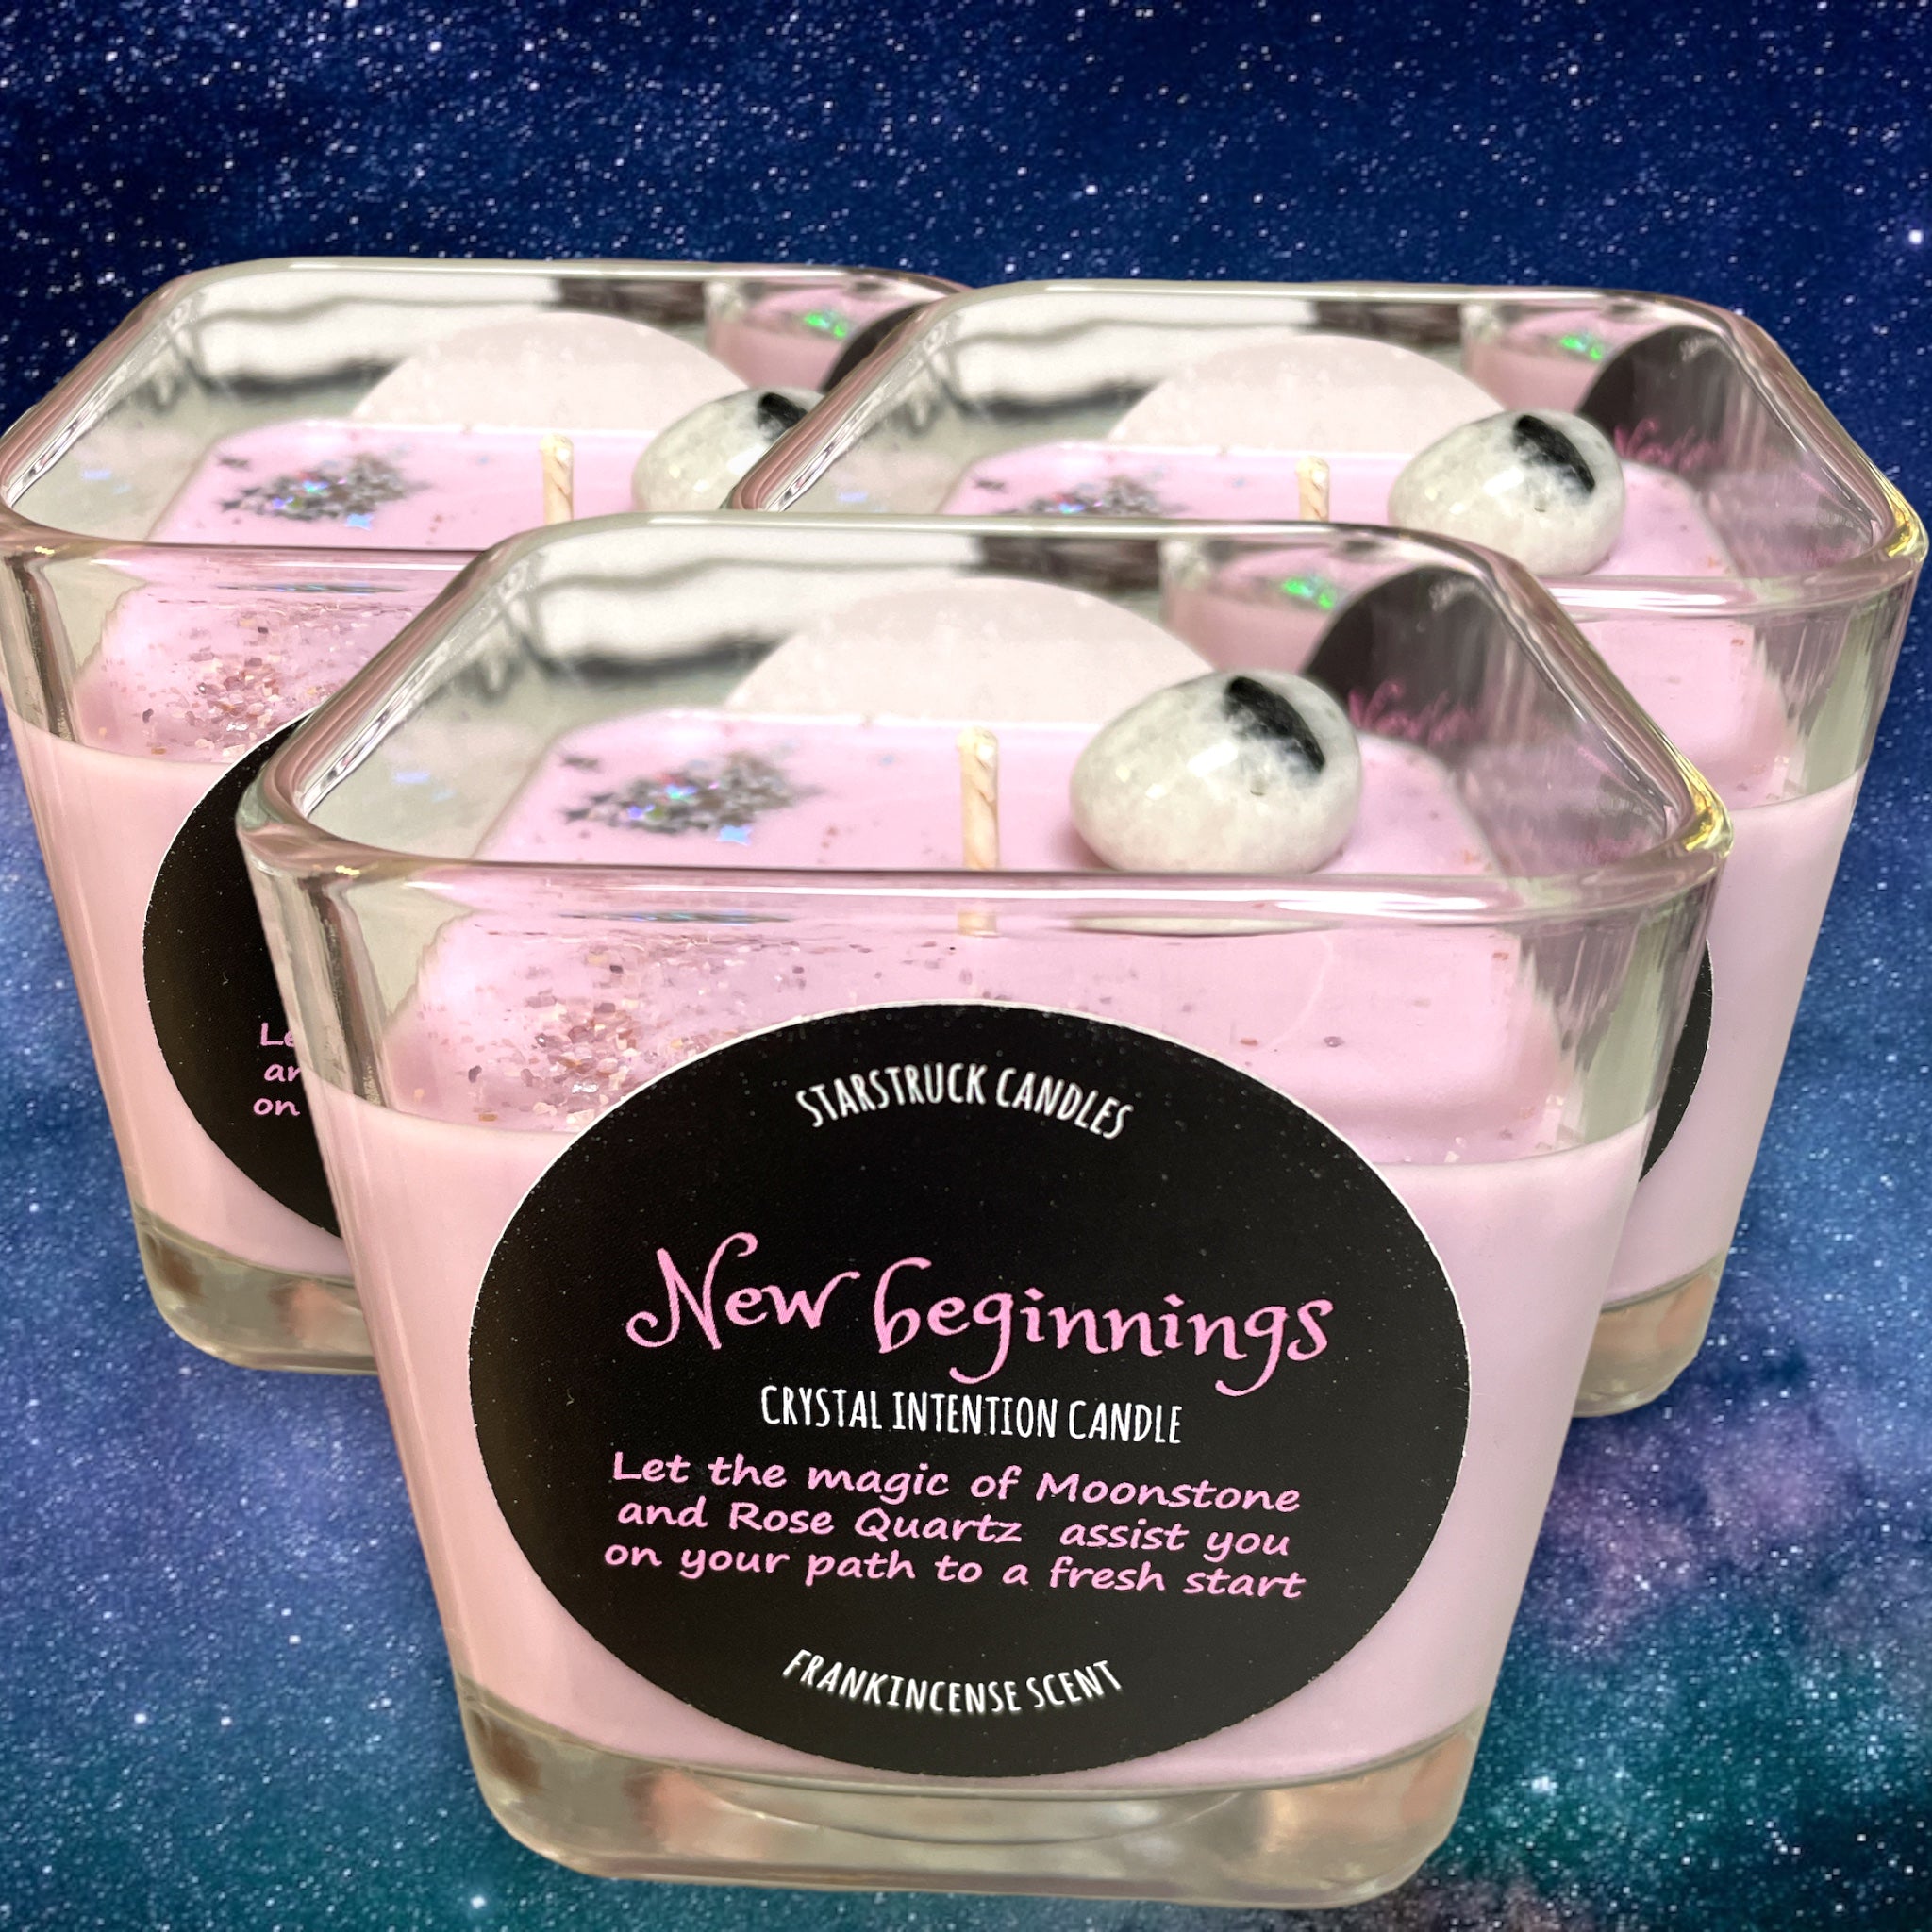 New Beginnings Crystal intention candle